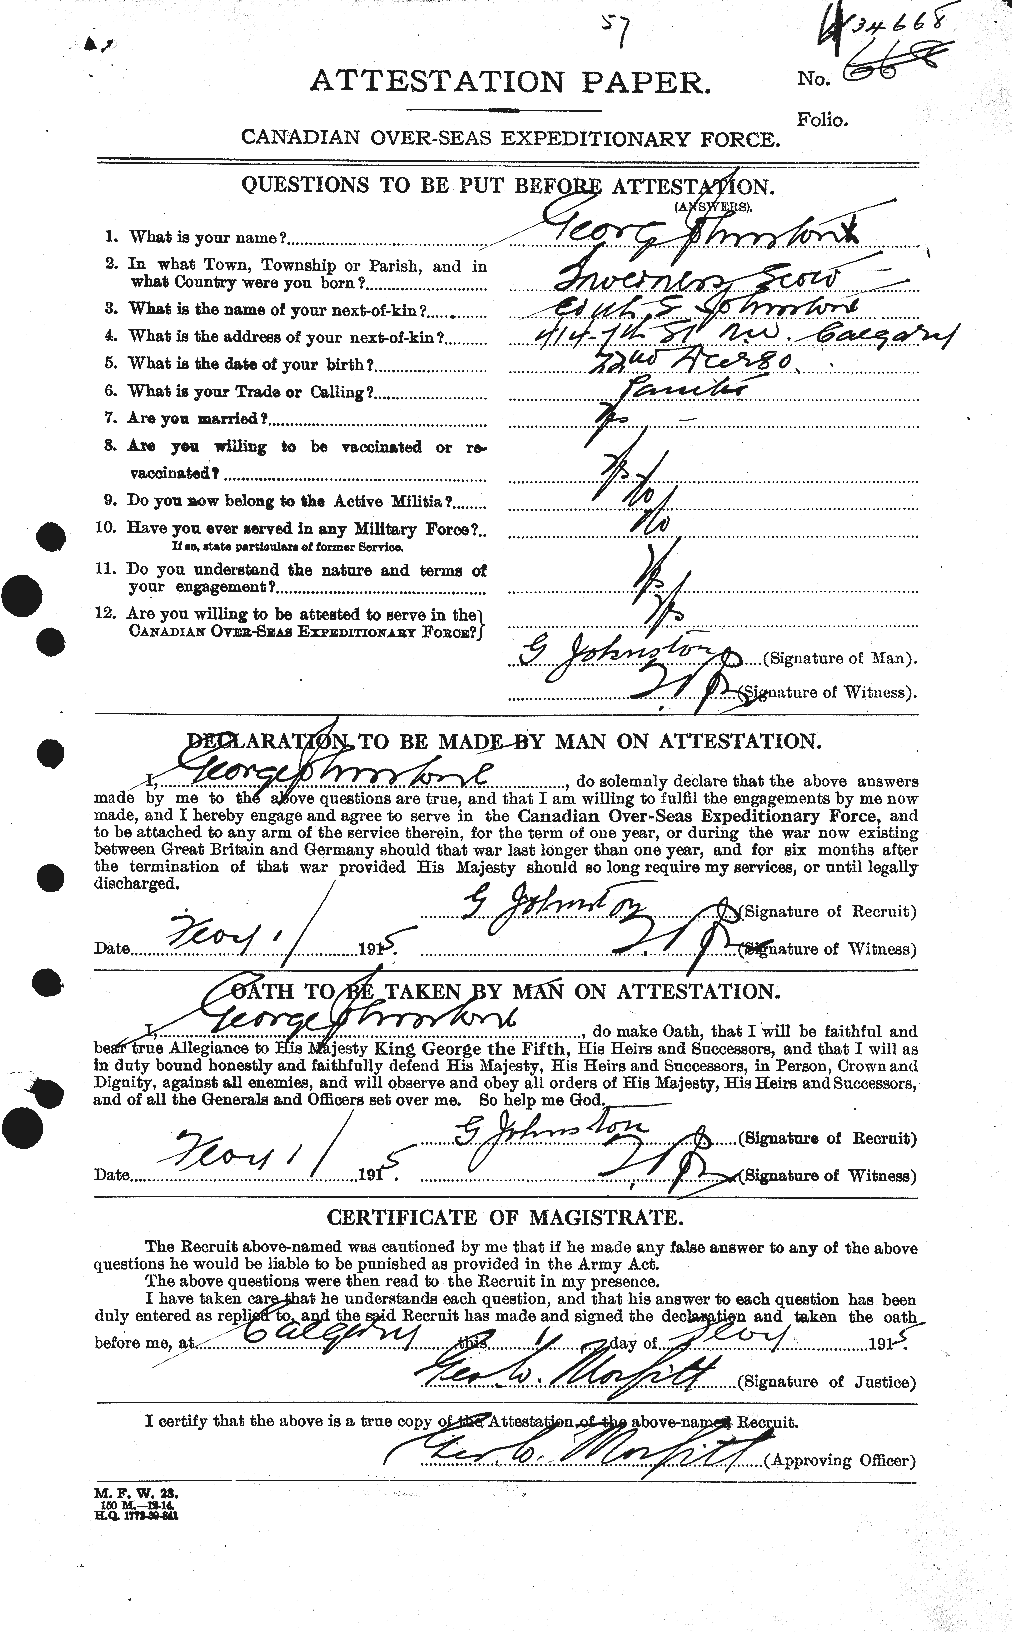 Personnel Records of the First World War - CEF 424096a